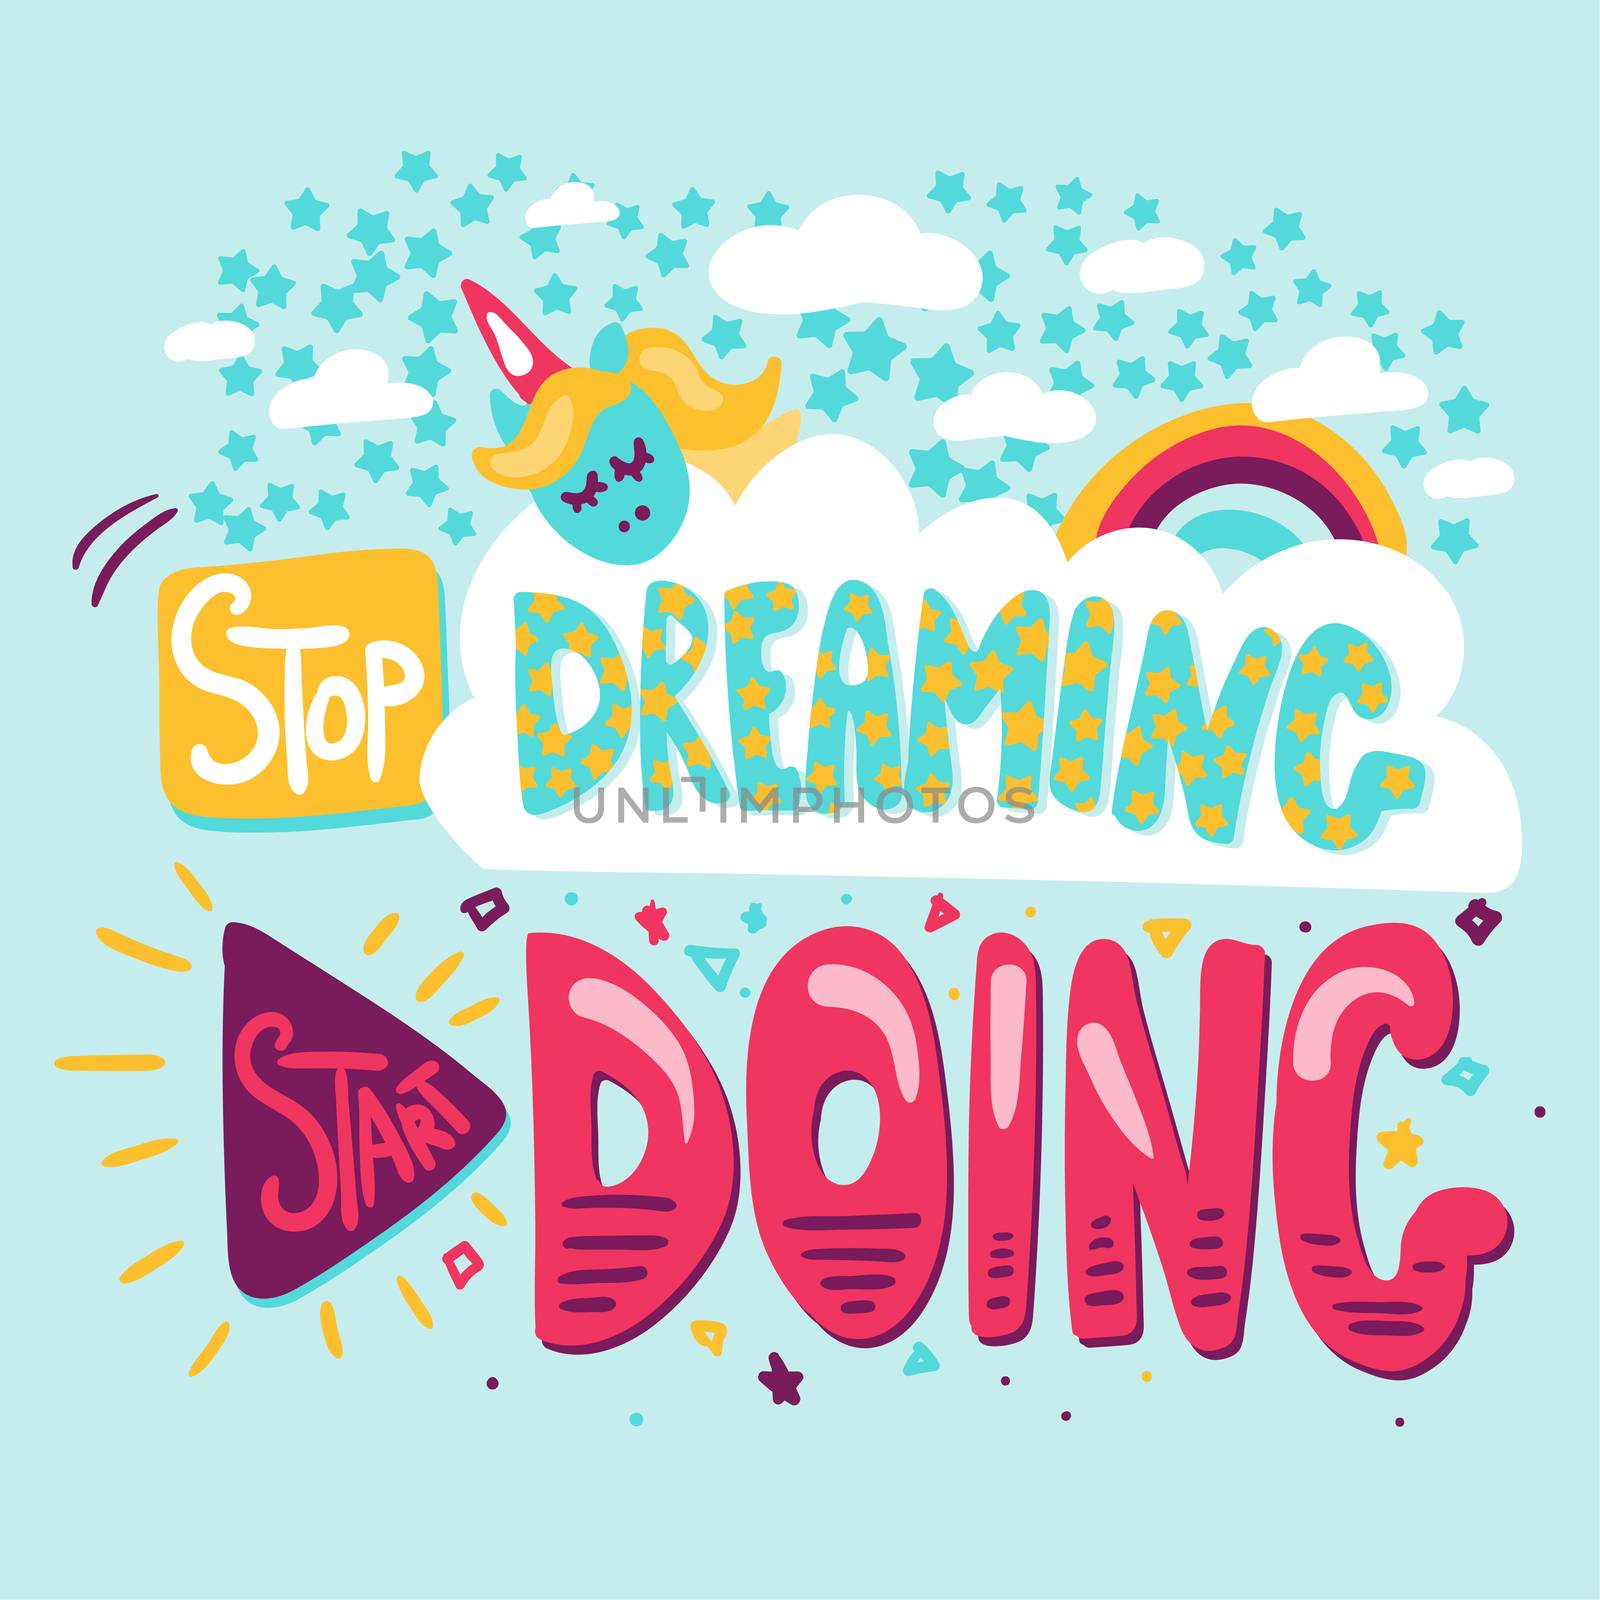 Success Secret - Start Now. Stop dreaming and start doing. Motivation and inspiration slogan. Inspire poster for startup, business projects and sport achievements. Vector